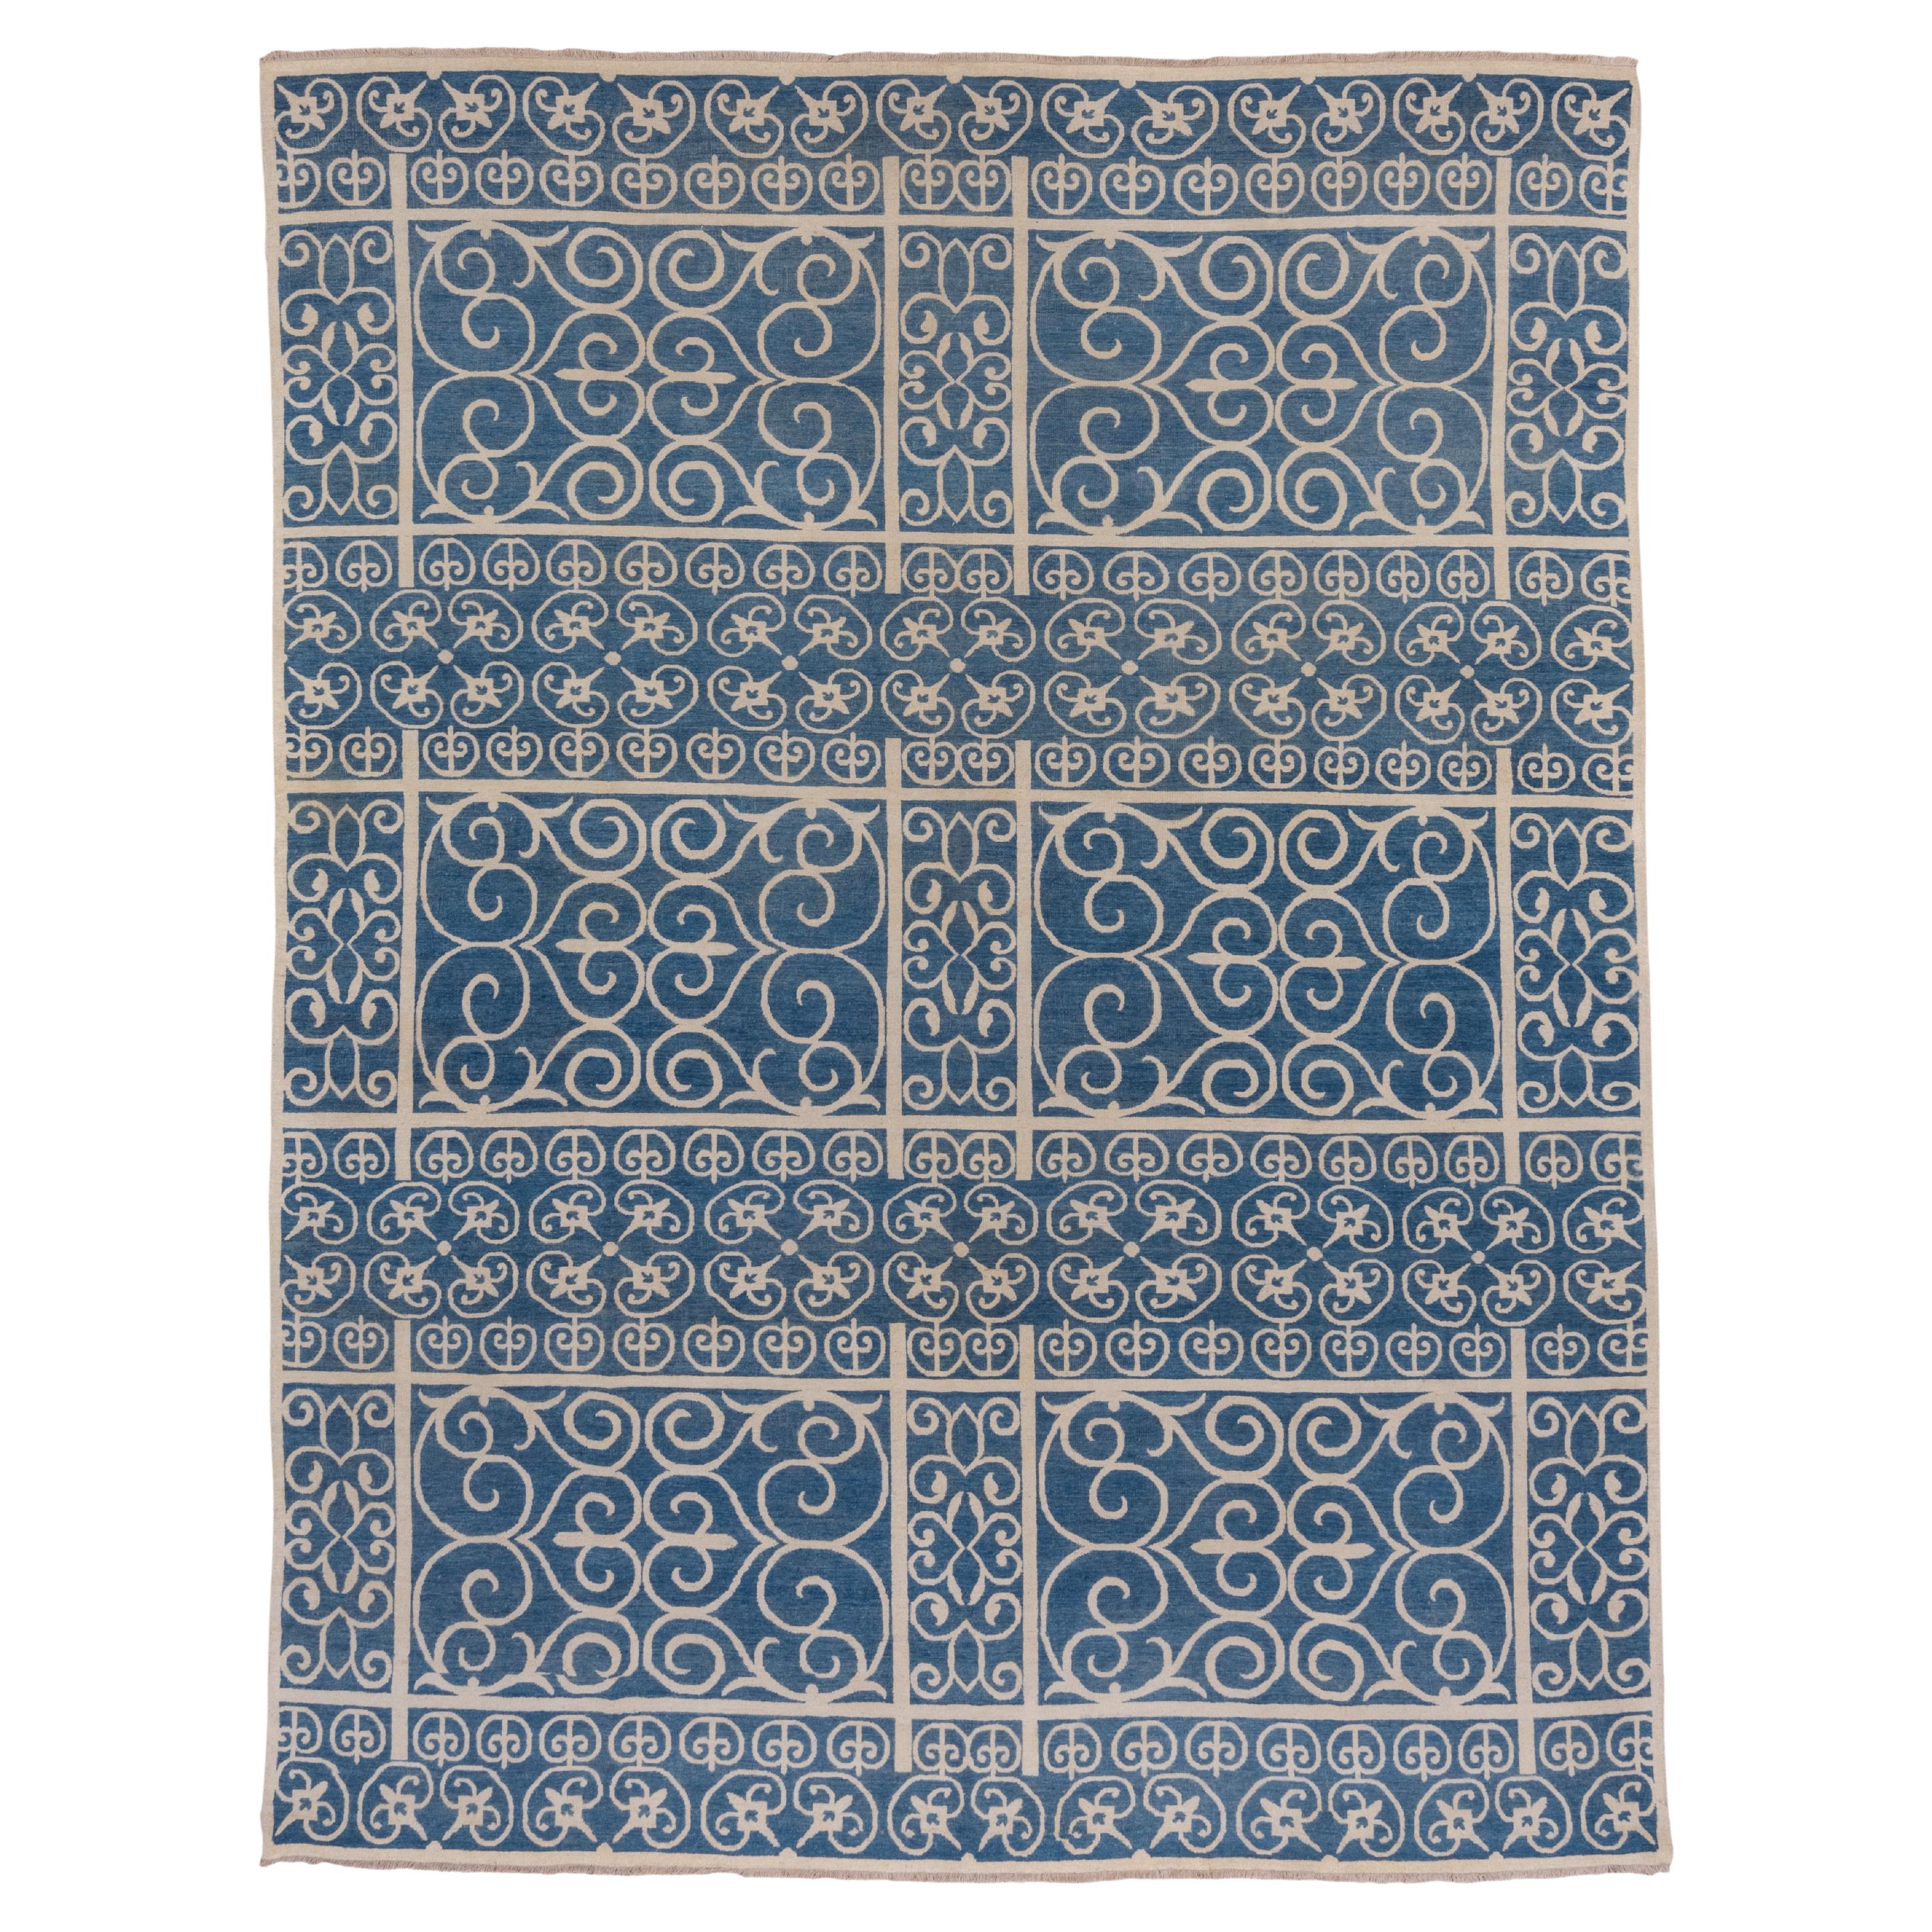 Finely Woven Modern Indian Rug, Hangknotted, Royal Blue & Cream Palette